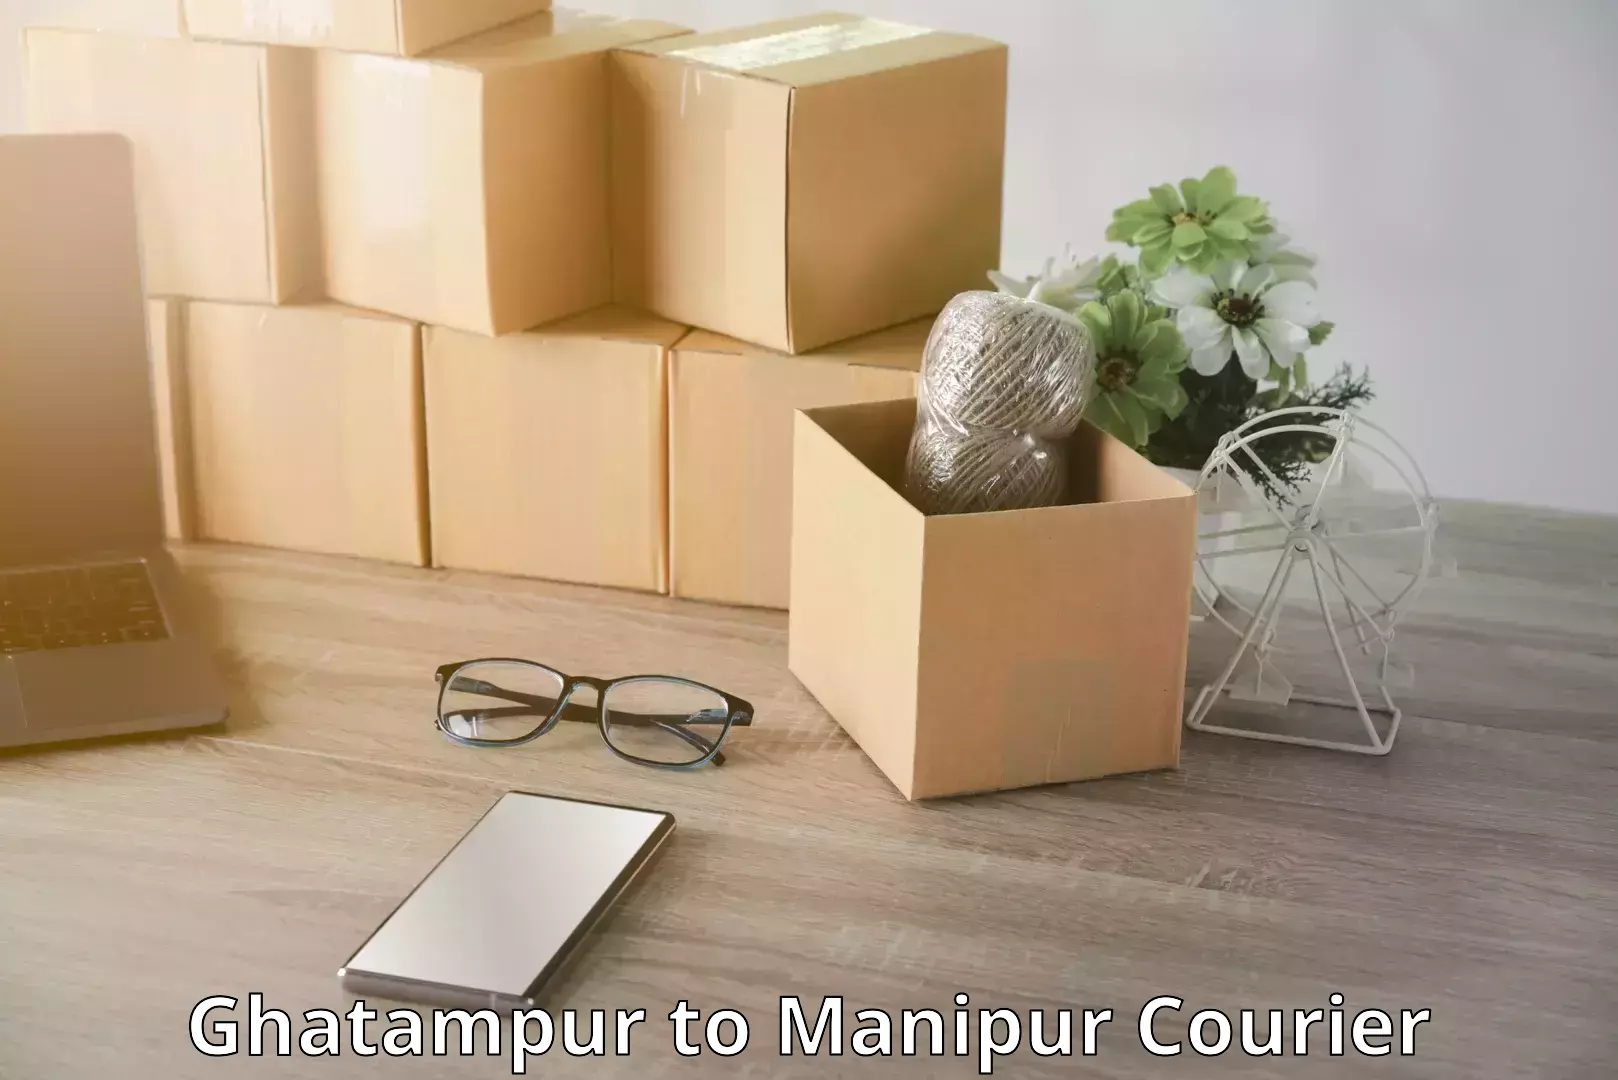 Luggage shipment specialists Ghatampur to Manipur